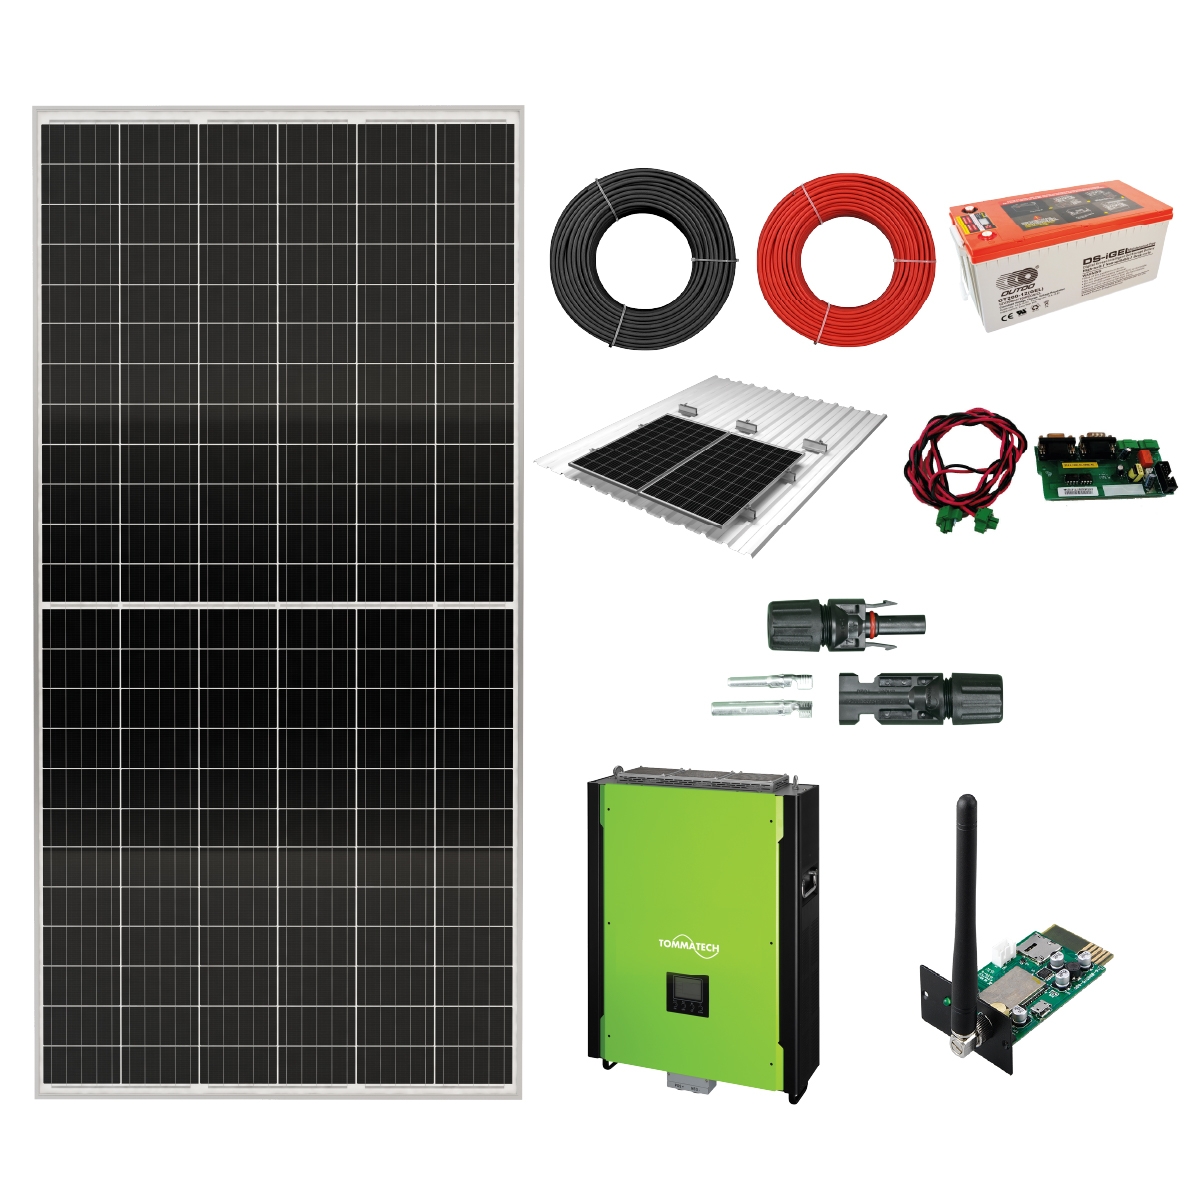 15kW / 21.84kWp / 57.6kWh / 3~ Dual MPPT Solar Off-Grid Solution